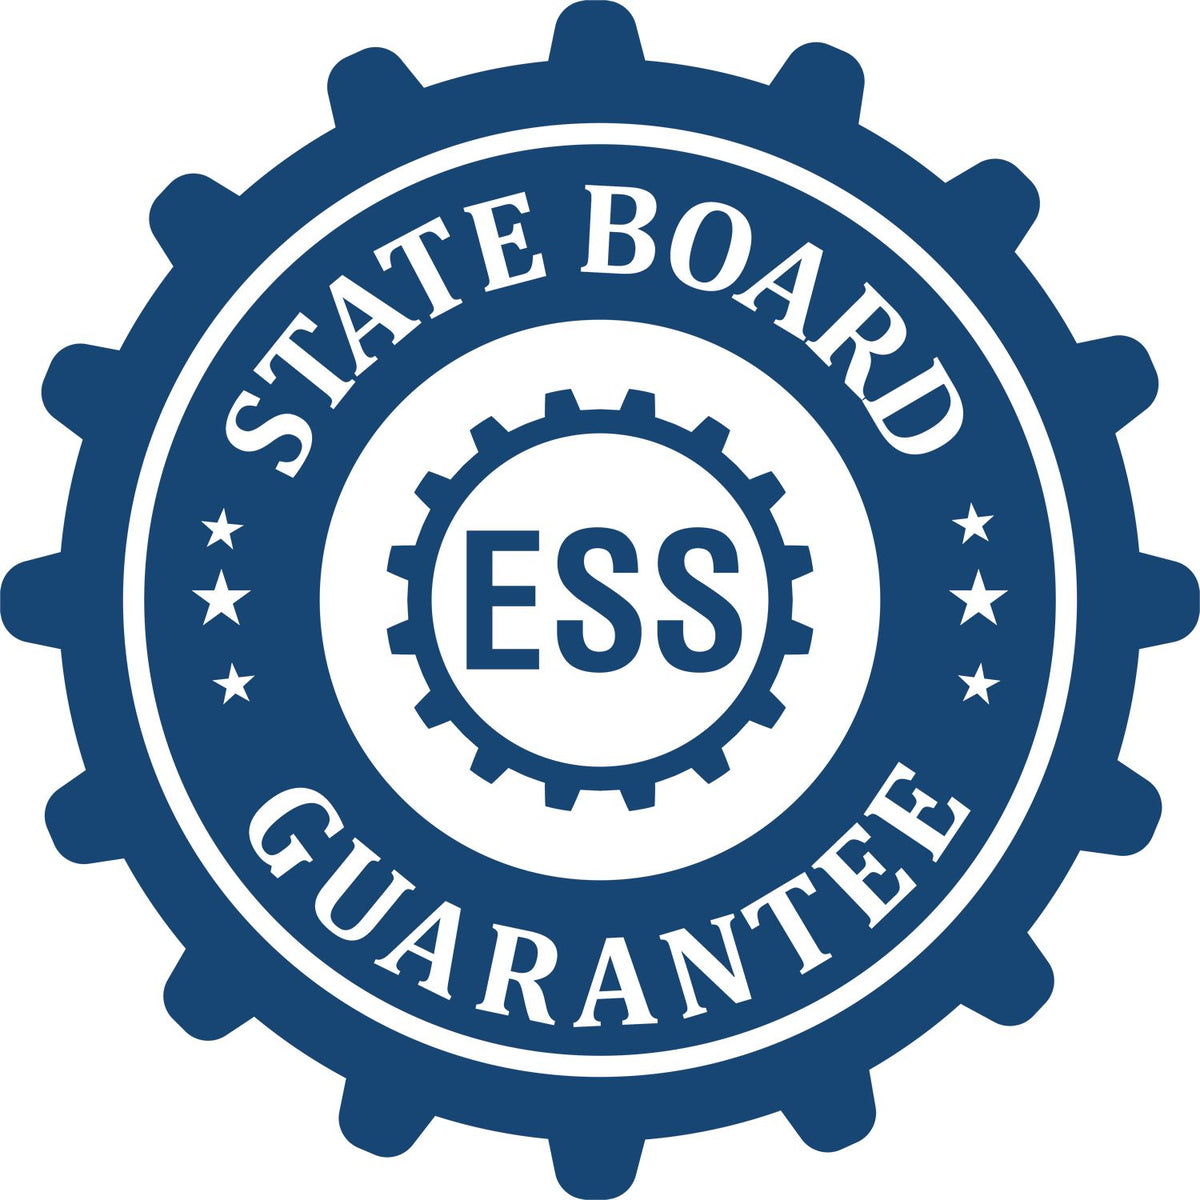 An emblem in a gear shape illustrating a state board guarantee for the Oregon Professional Geologist Seal Stamp